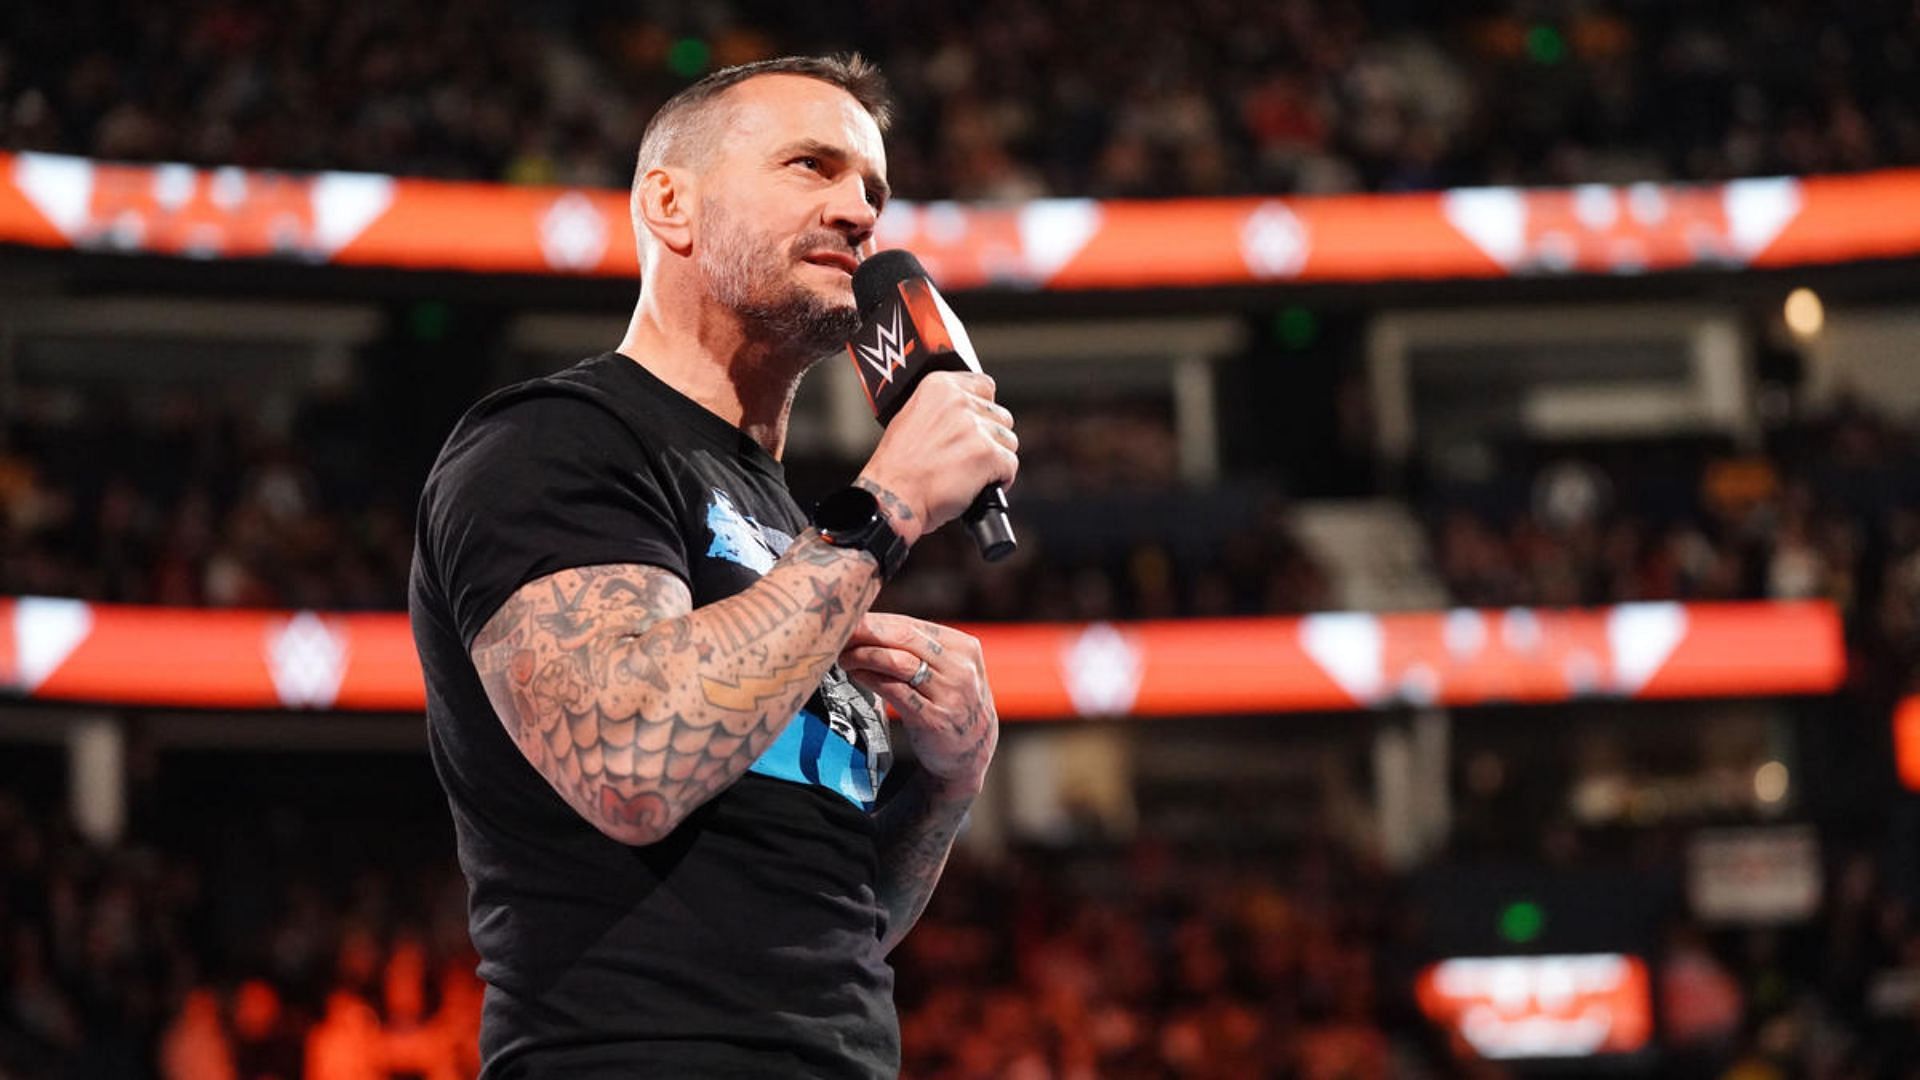 CM Punk had a promo segment in the closing moments of RAW